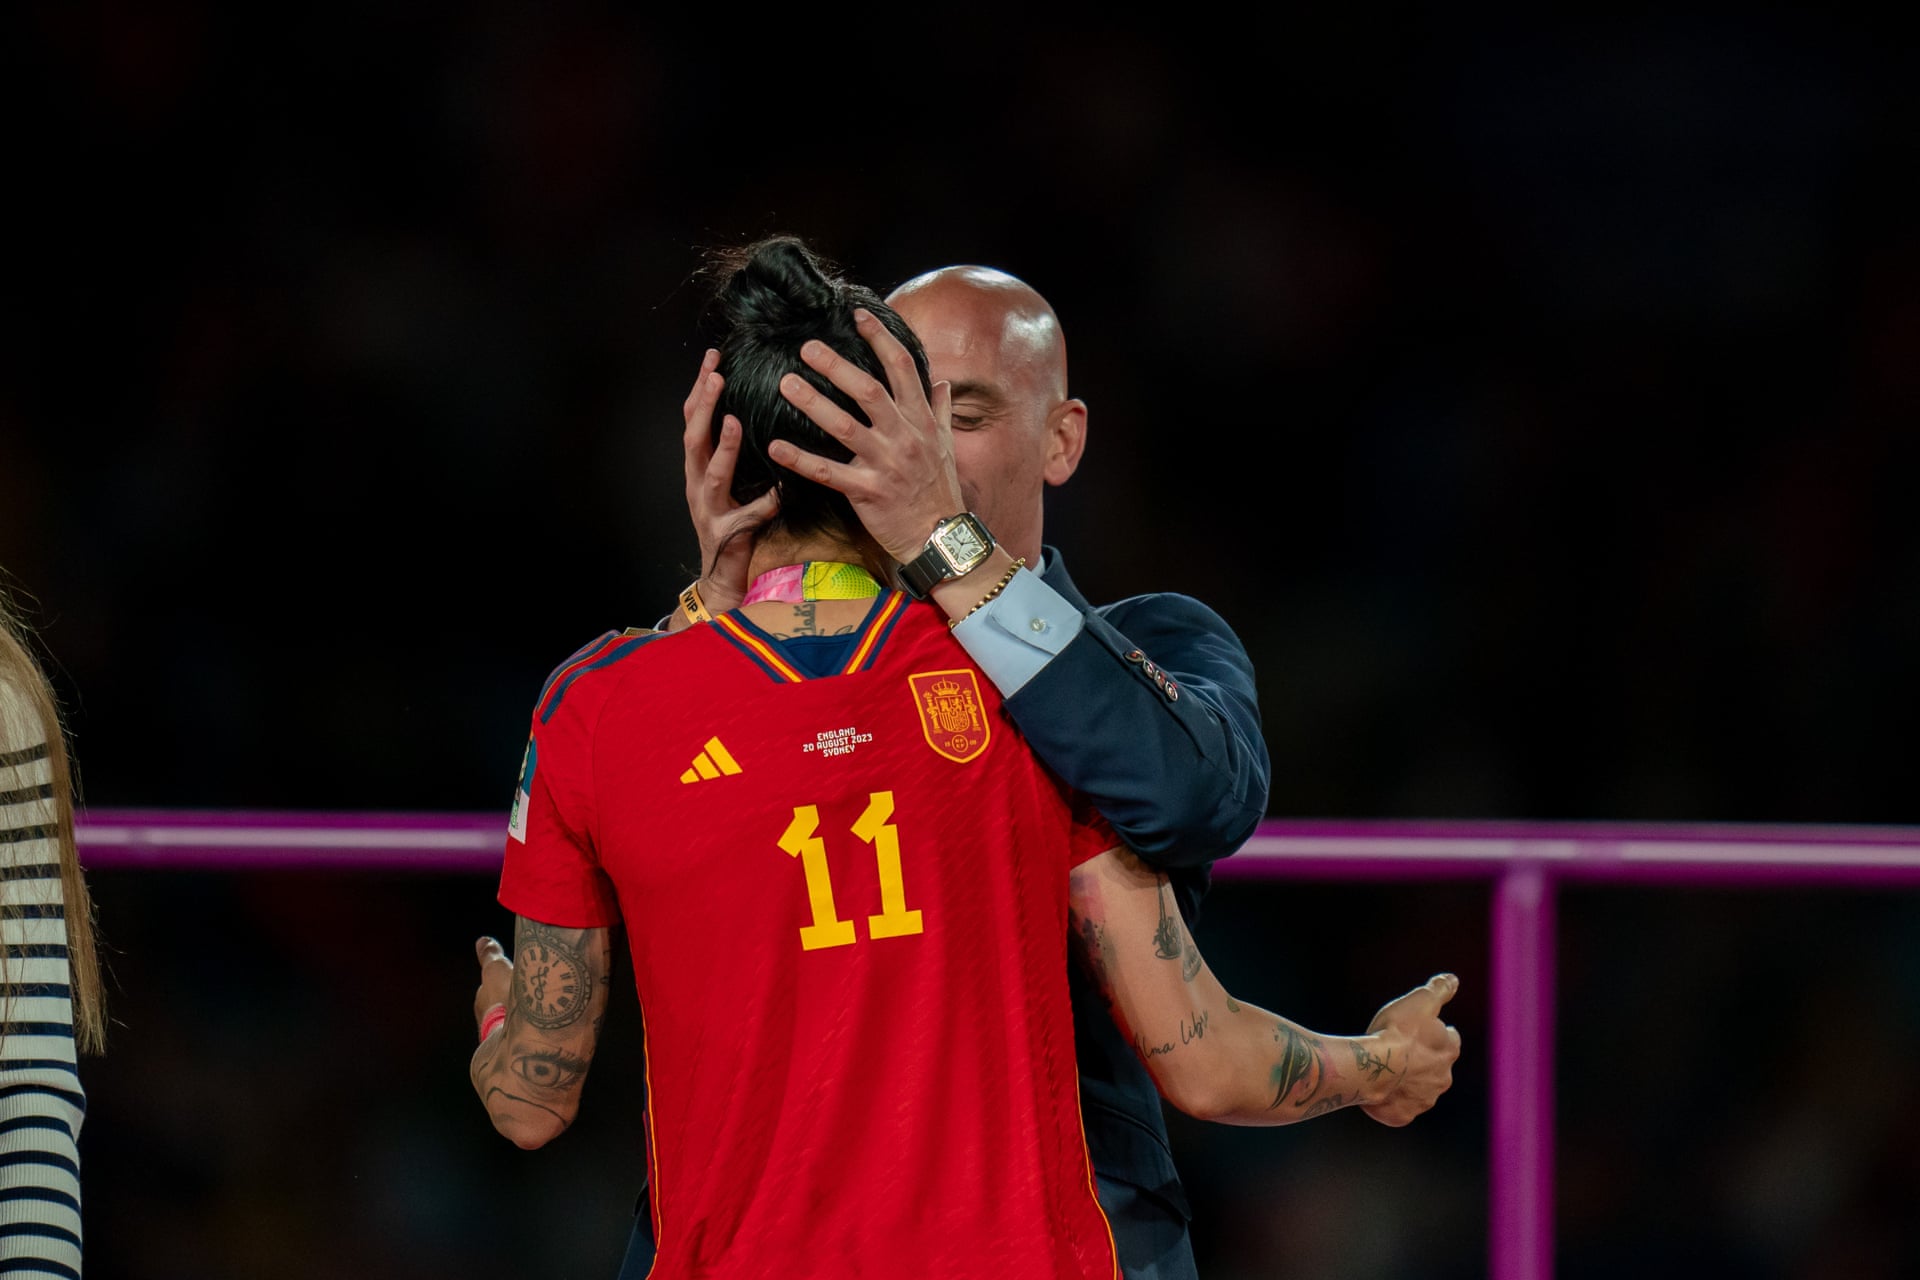 Sydney, Australia Luis Rubiales, the president of Spain’s football federation, kisses Jenni Hermoso on the lips after Spain defeated England 1-0 to win the Women’s World Cup in Sydney. Rubiales hit out at ‘false feminism’and a ‘social assassination’ of his character as he vowed to stay on as head of Spain’s football federation amid fierce criticism and a Fifa investigation. Photograph: Noe Llamas/SPP/Shutterstock